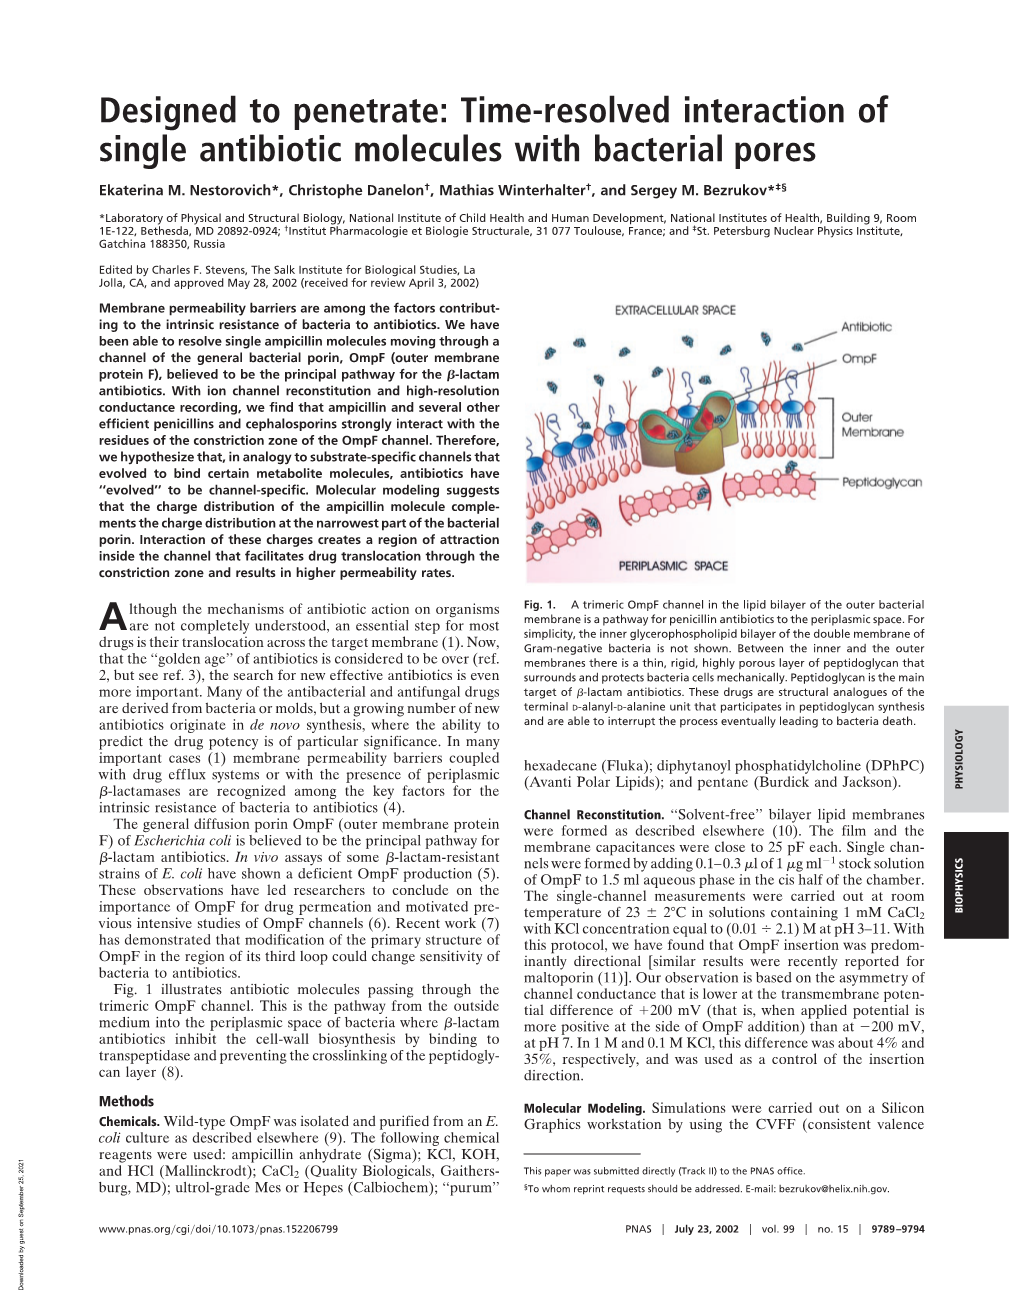 Time-Resolved Interaction of Single Antibiotic Molecules with Bacterial Pores